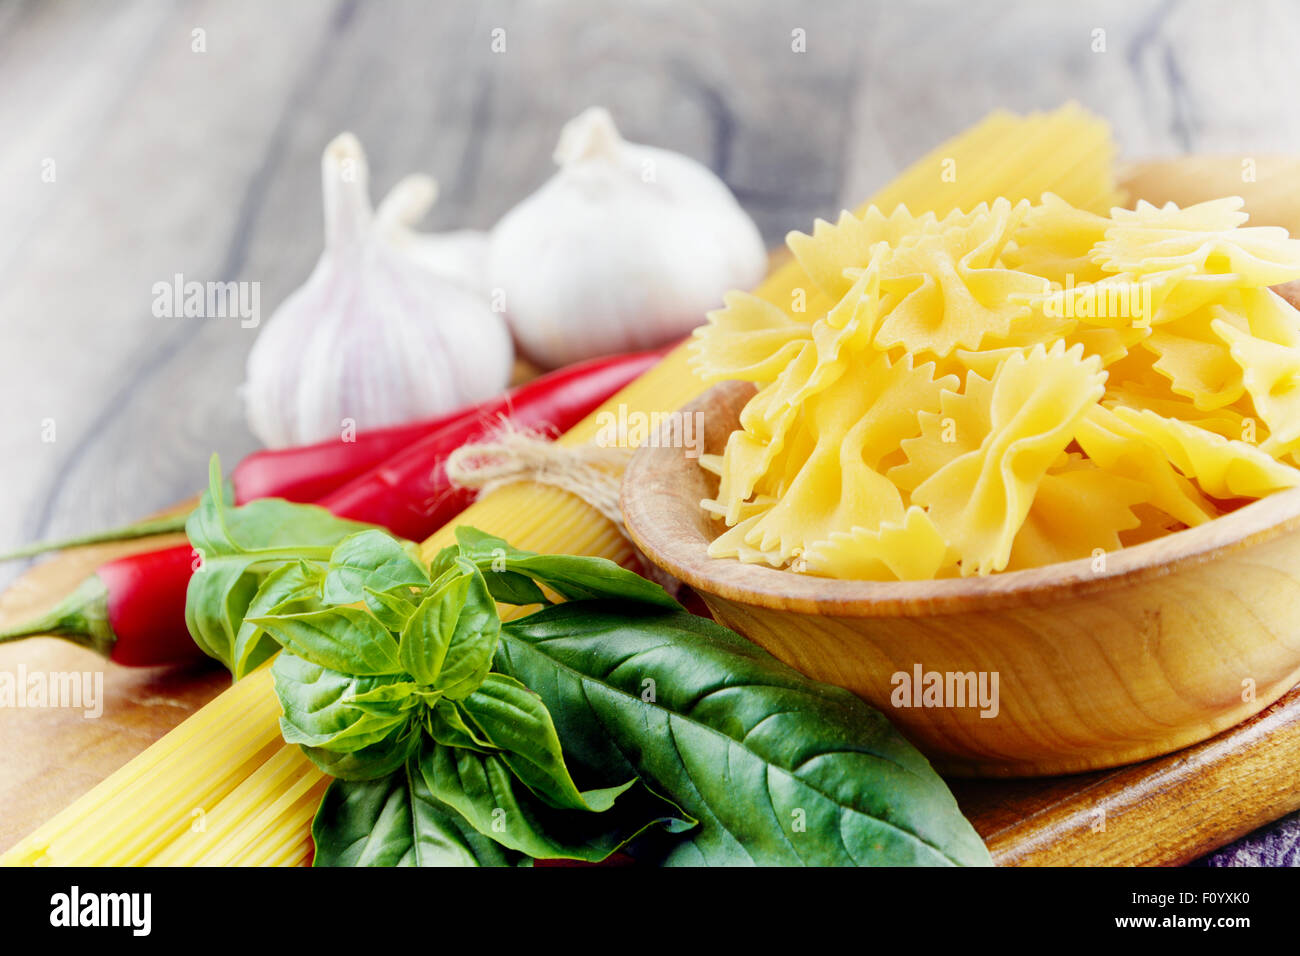 Raw spagetti and farfalle pasta on the wooden table Stock Photo